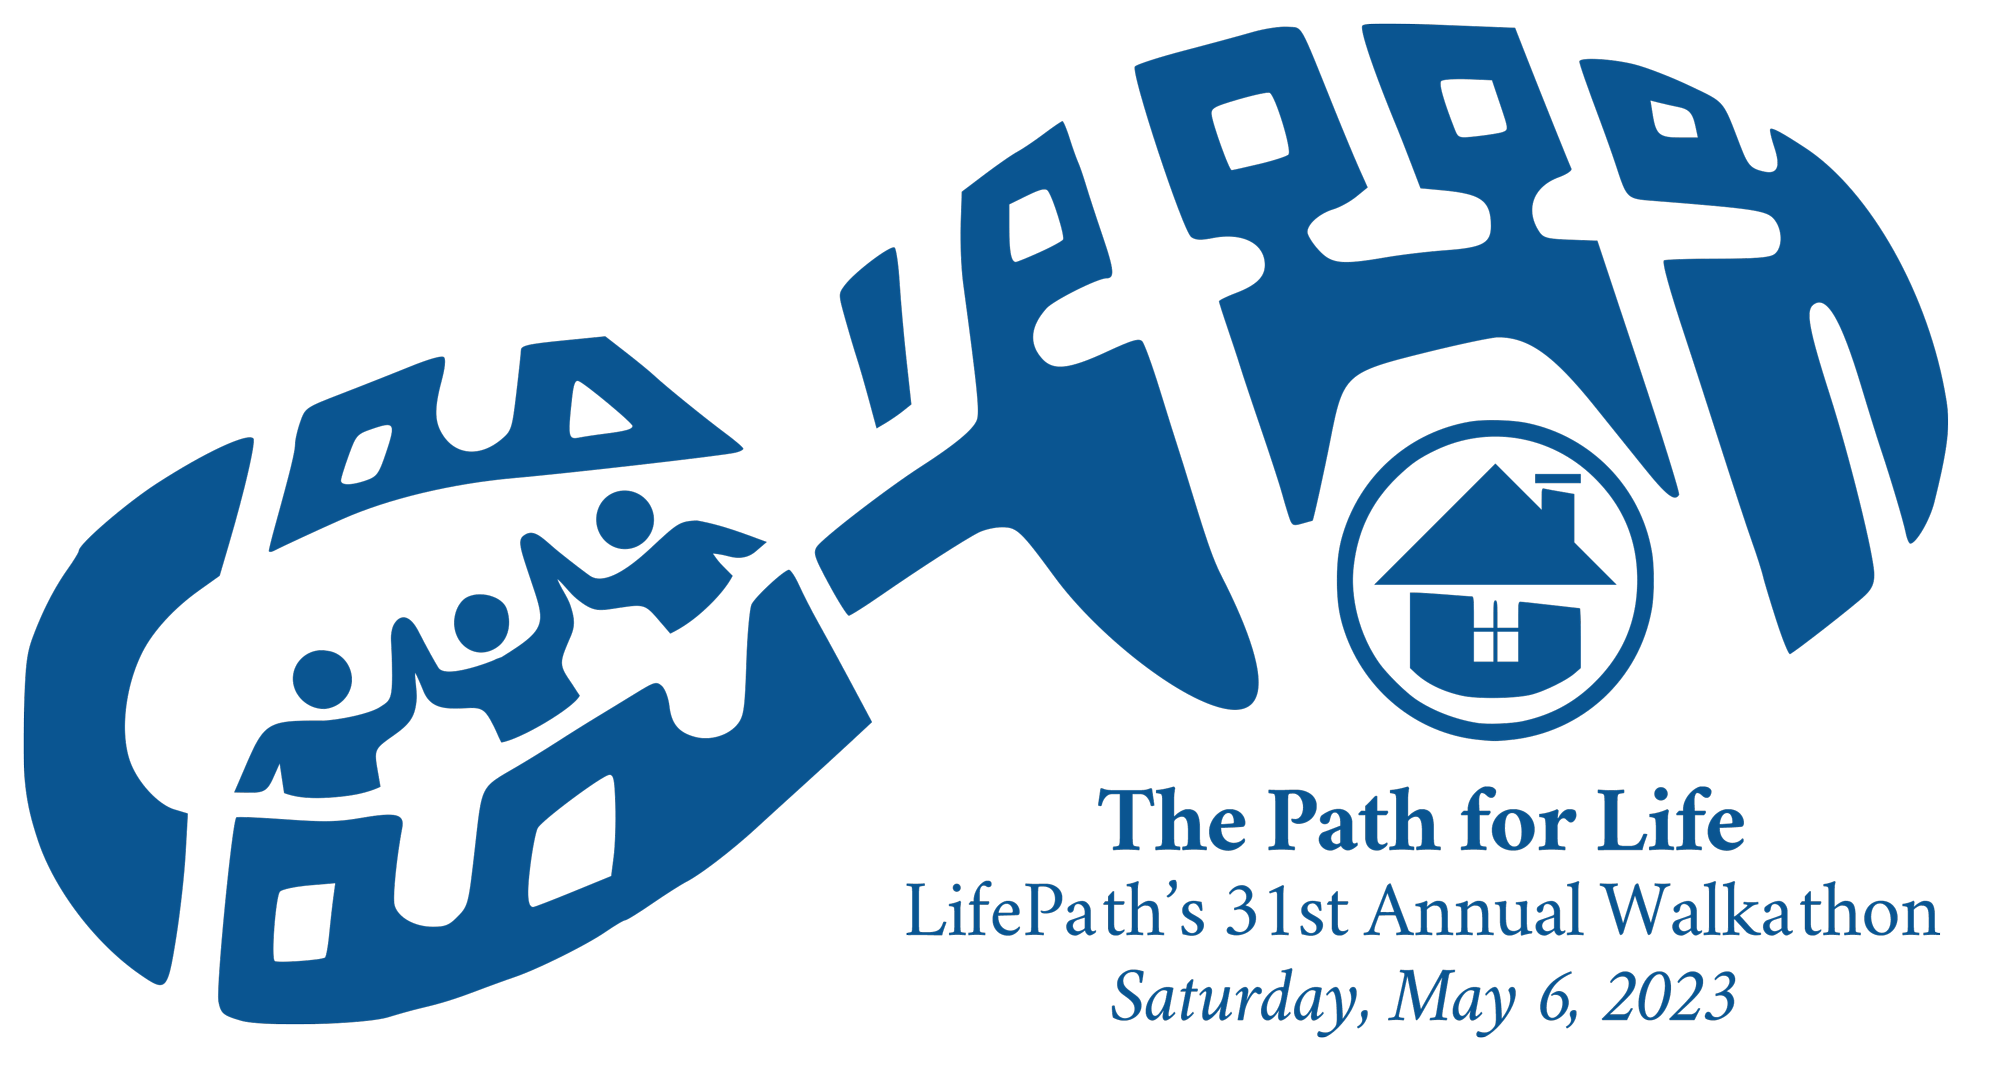 The Path for Life: LifePath's 31st Annual Walkathon, Saturday, May 6, 2023